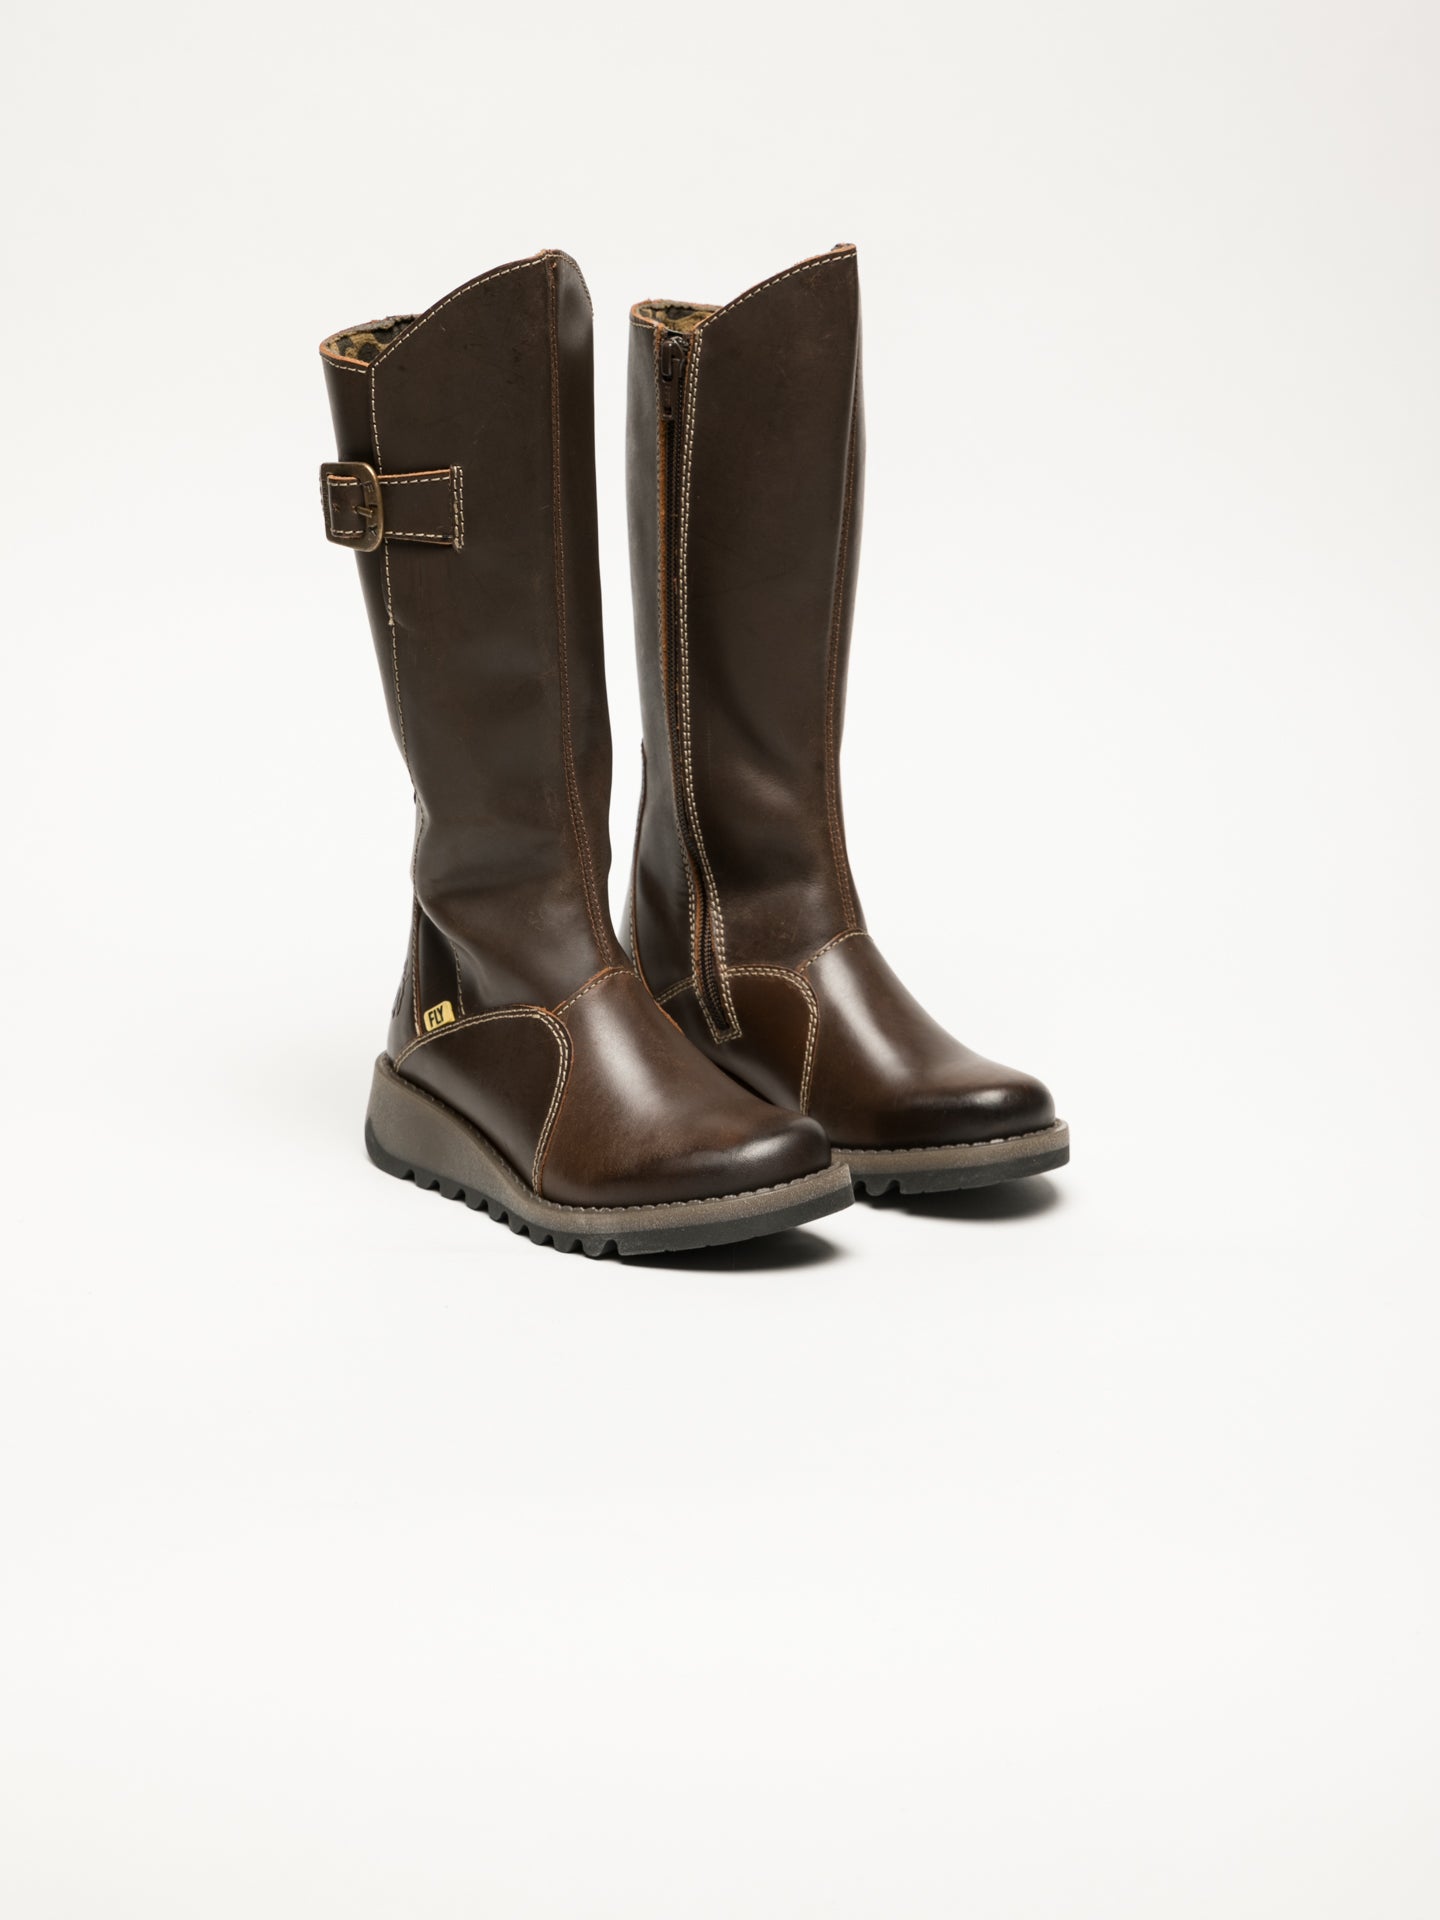 Fly London Brown Buckle Boots